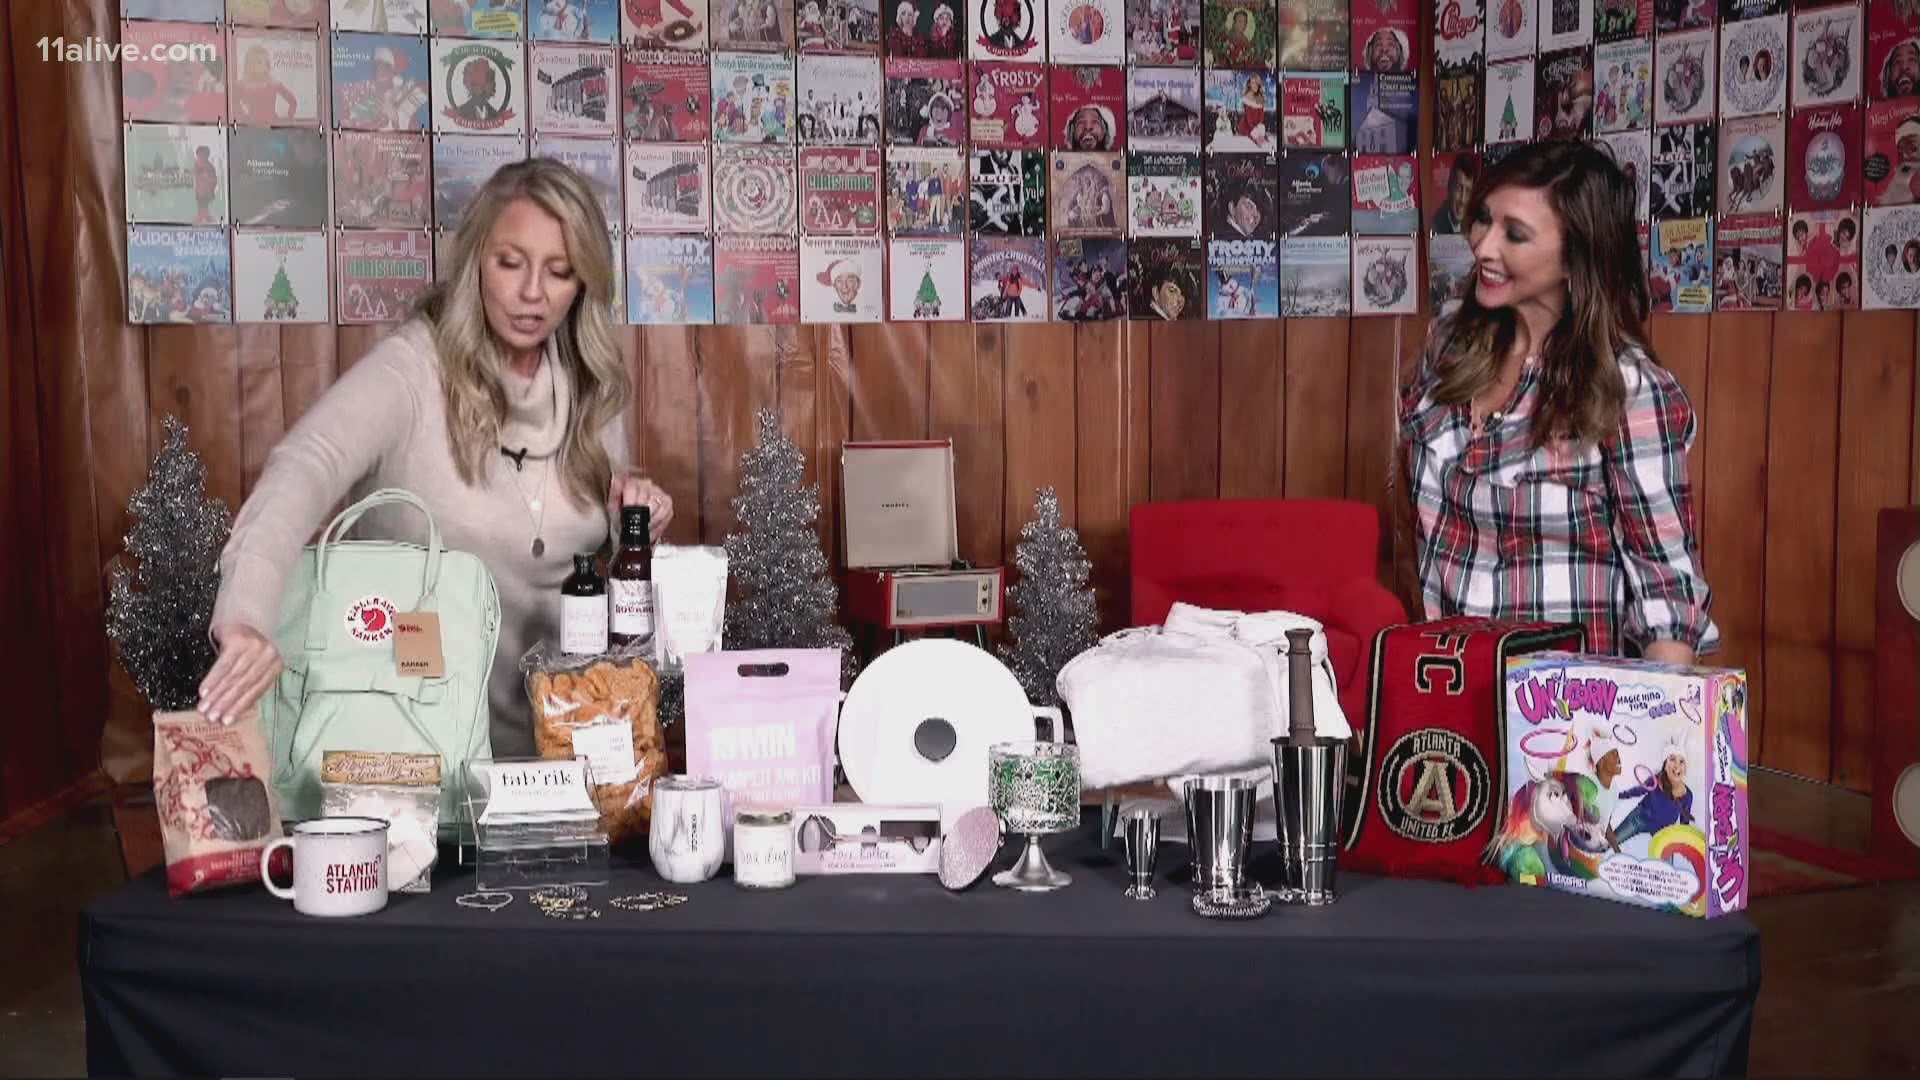 Kristie Ray shares all the great gifts you'll find at Atlantic Station, perfect for the whole family.